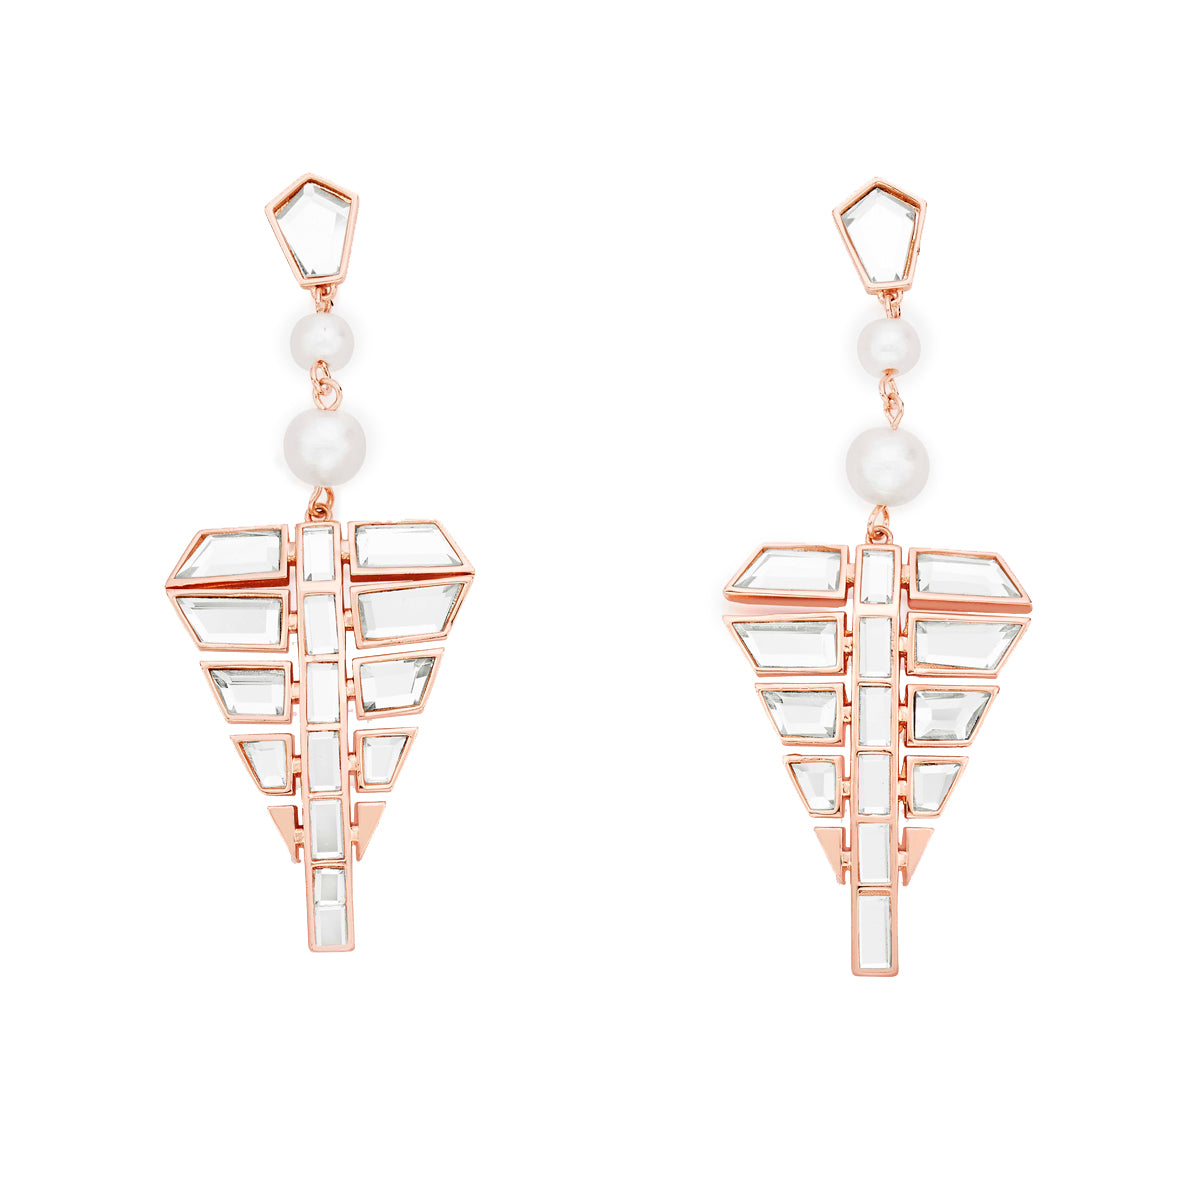 These earrings are handcrafted with mirror, pearl and rose gold plated brass.These come with a whole lot of edge but they need a sprinkling of attitude from you to match.